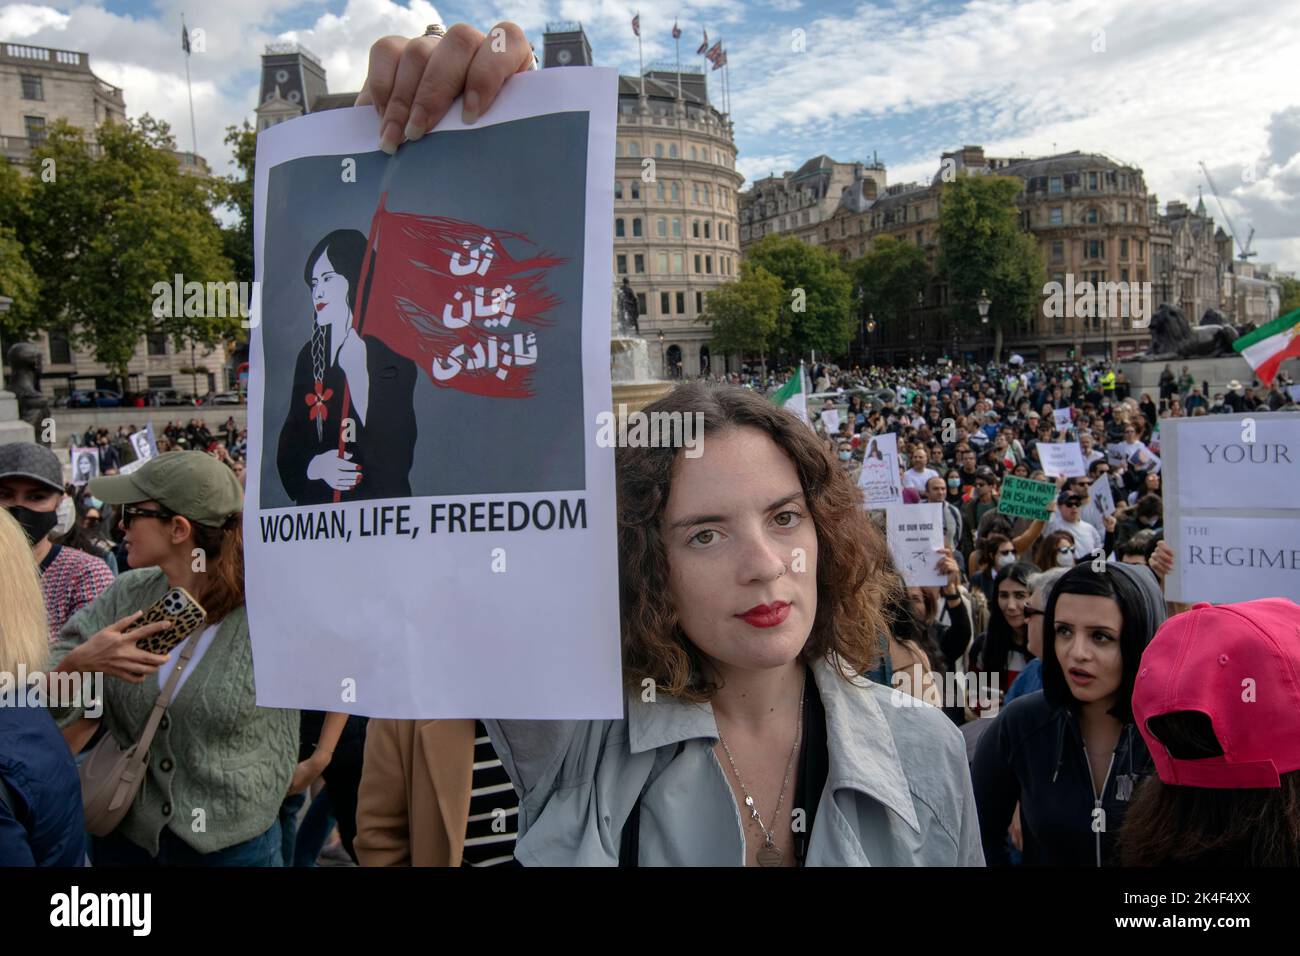 Woman, life, freedom’: London protest over Iran draws thousands to protest after the death of Mahsa Amini in police custody 01-10-2022 Stock Photo